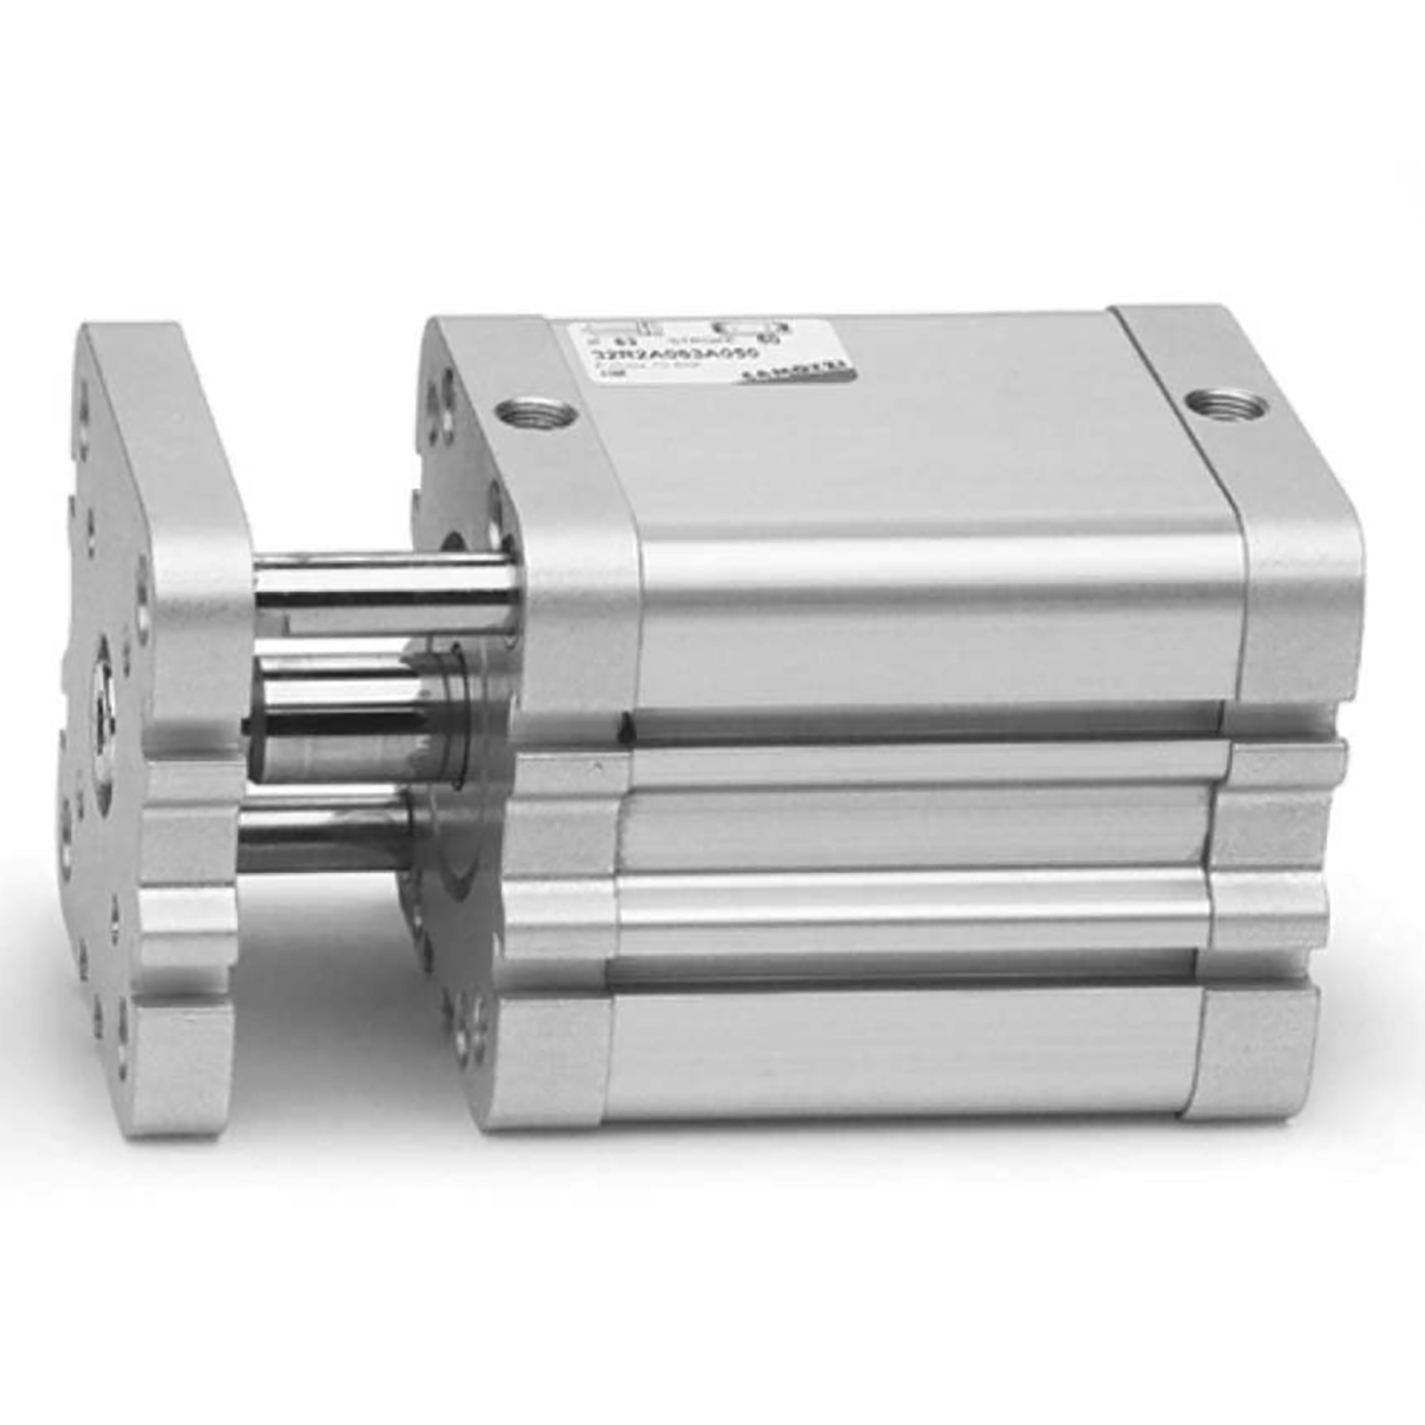 1/8" BSP Parallel Female Ports Series 32 Double Acting Compact Cylinder